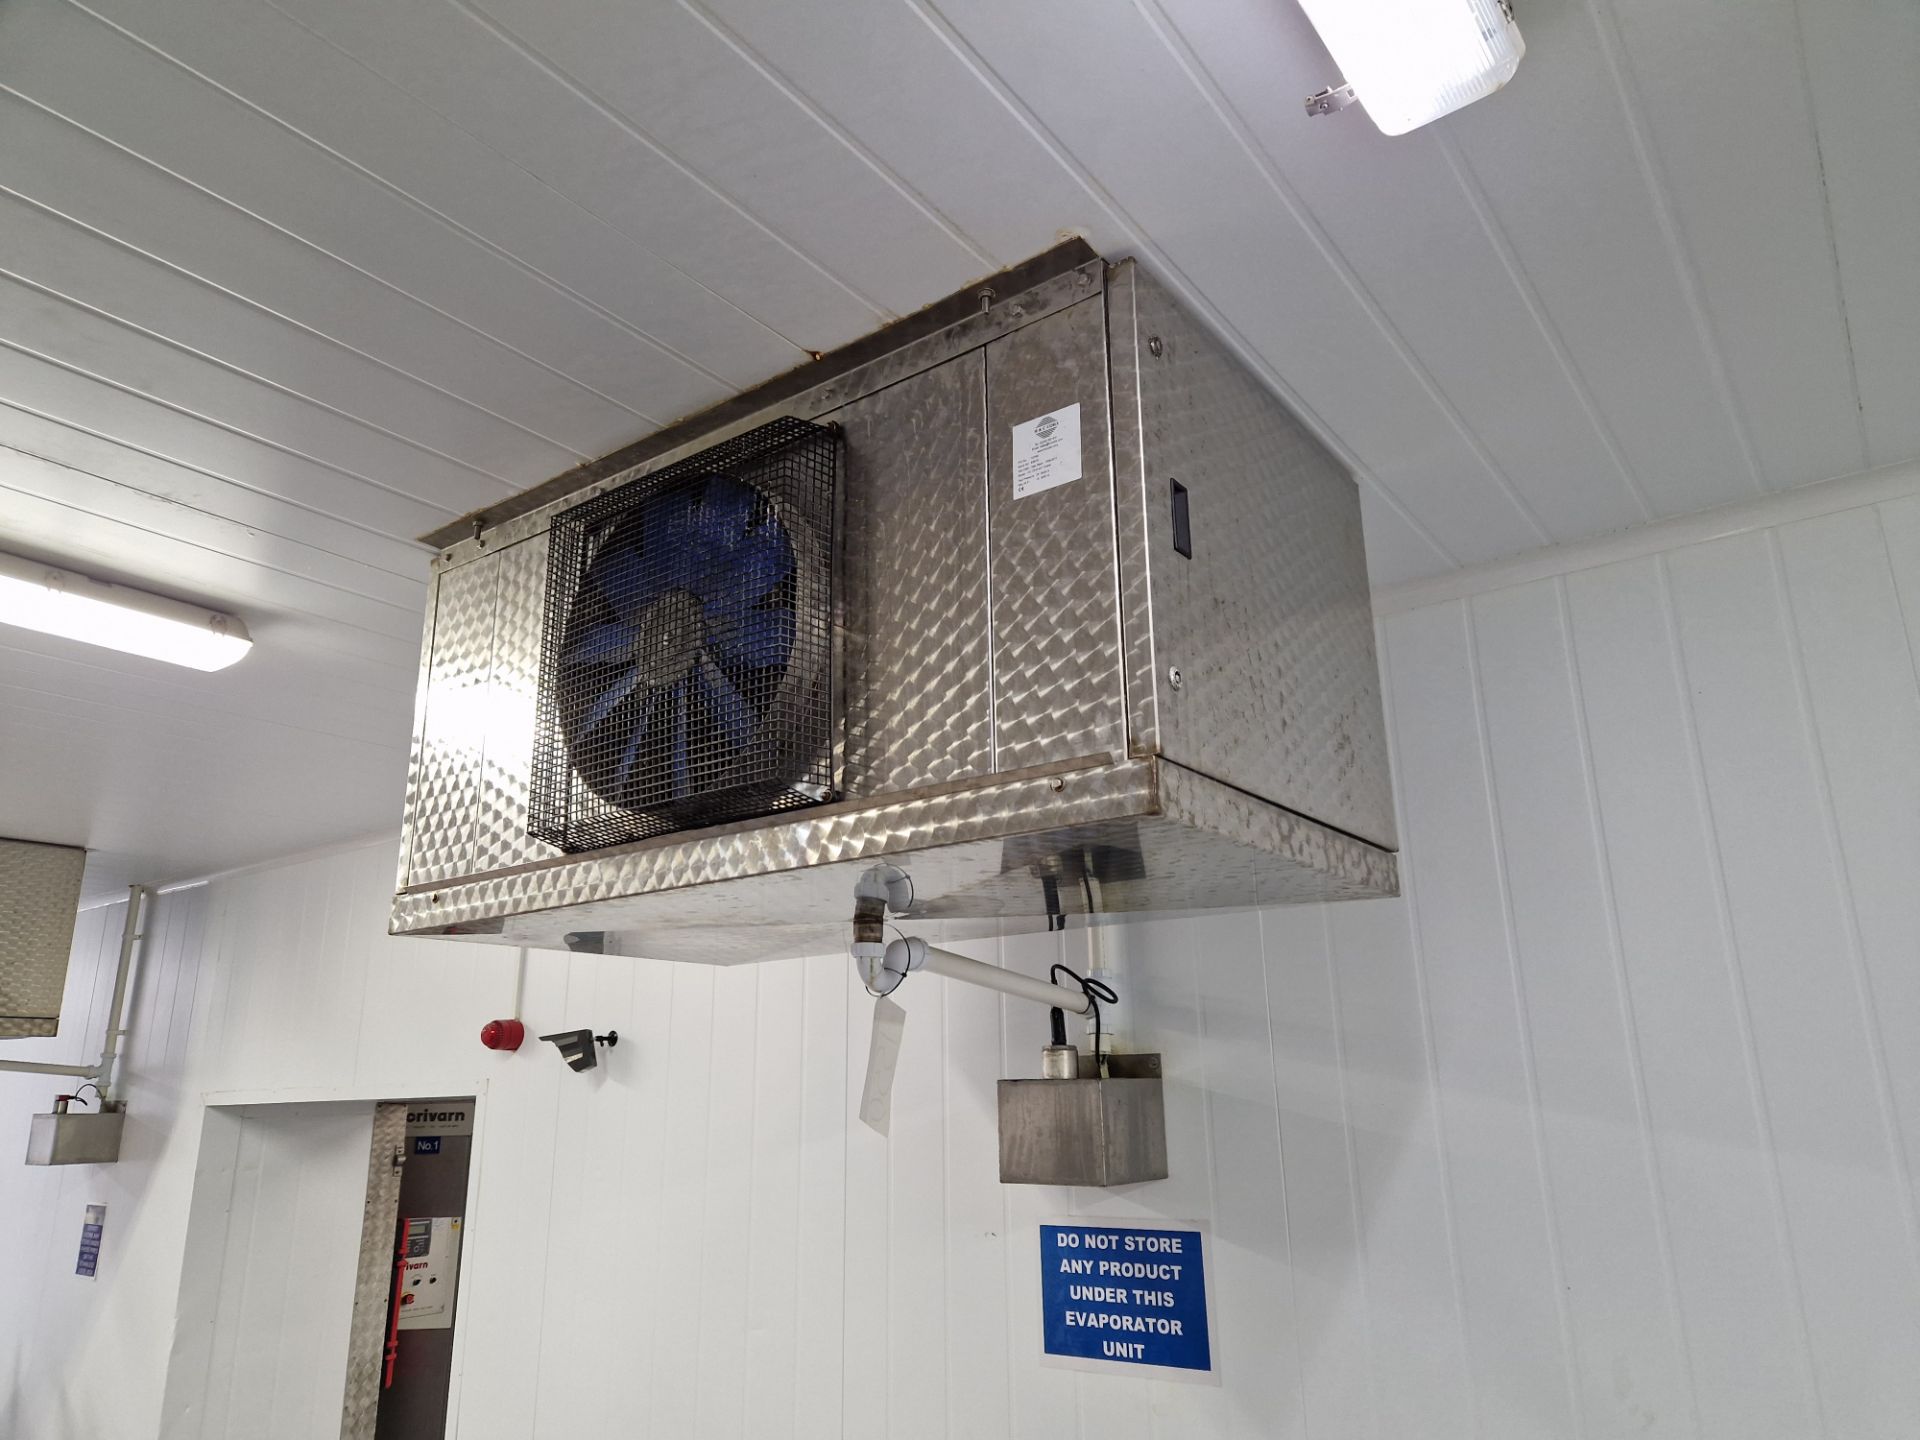 H & C Coils CC60-6 ED1 Single Fan Evaporator, S/N 63975 (Evaporator must be disconnected at - Image 2 of 2